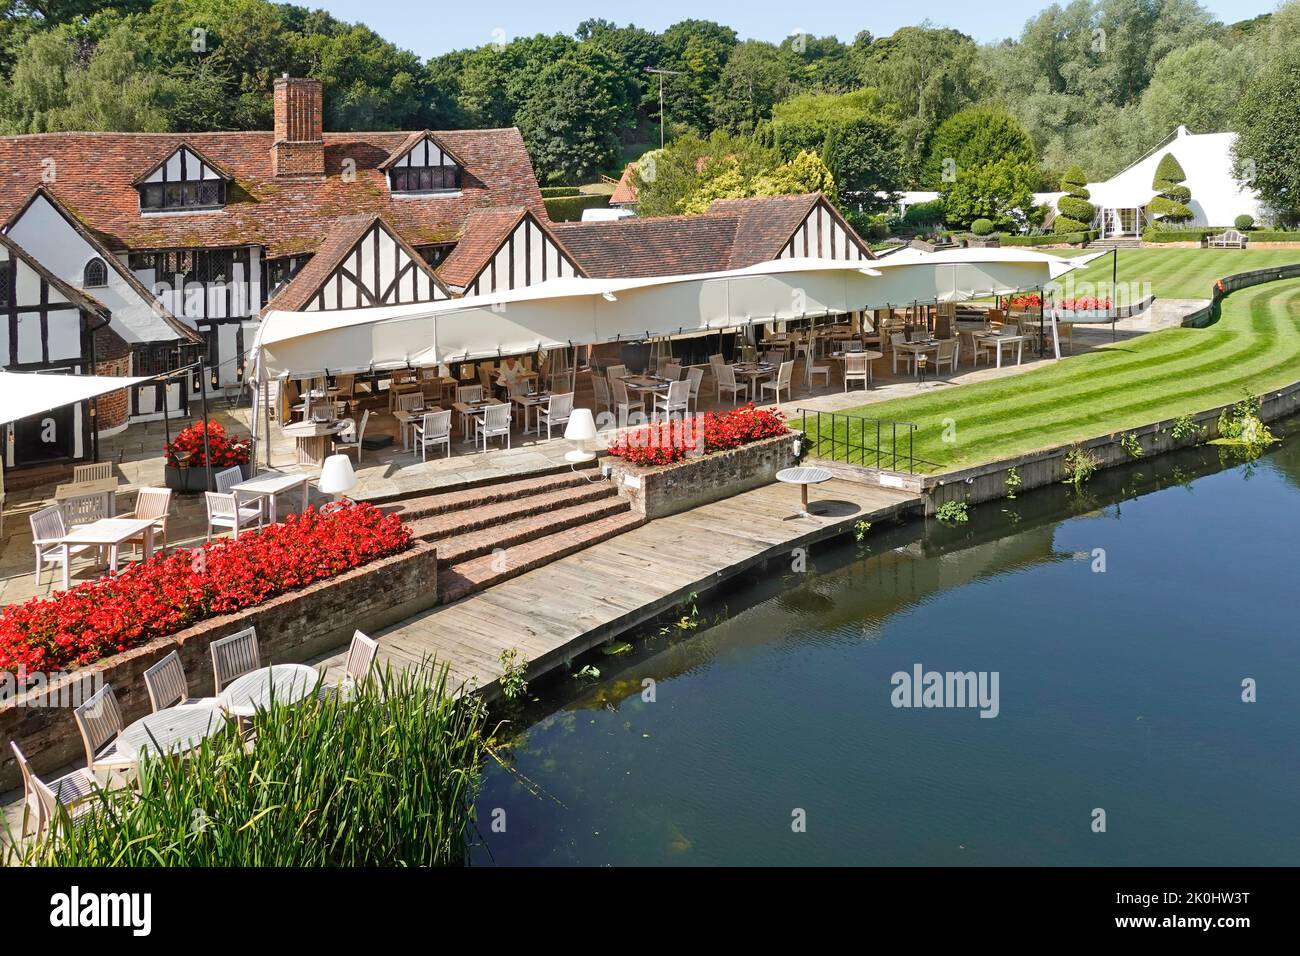 Idyllic Constable Country riverside landscape at Milsom Group Talbooth restaurant & wedding venue manicured lawns Essex side of River Stour England UK Stock Photo